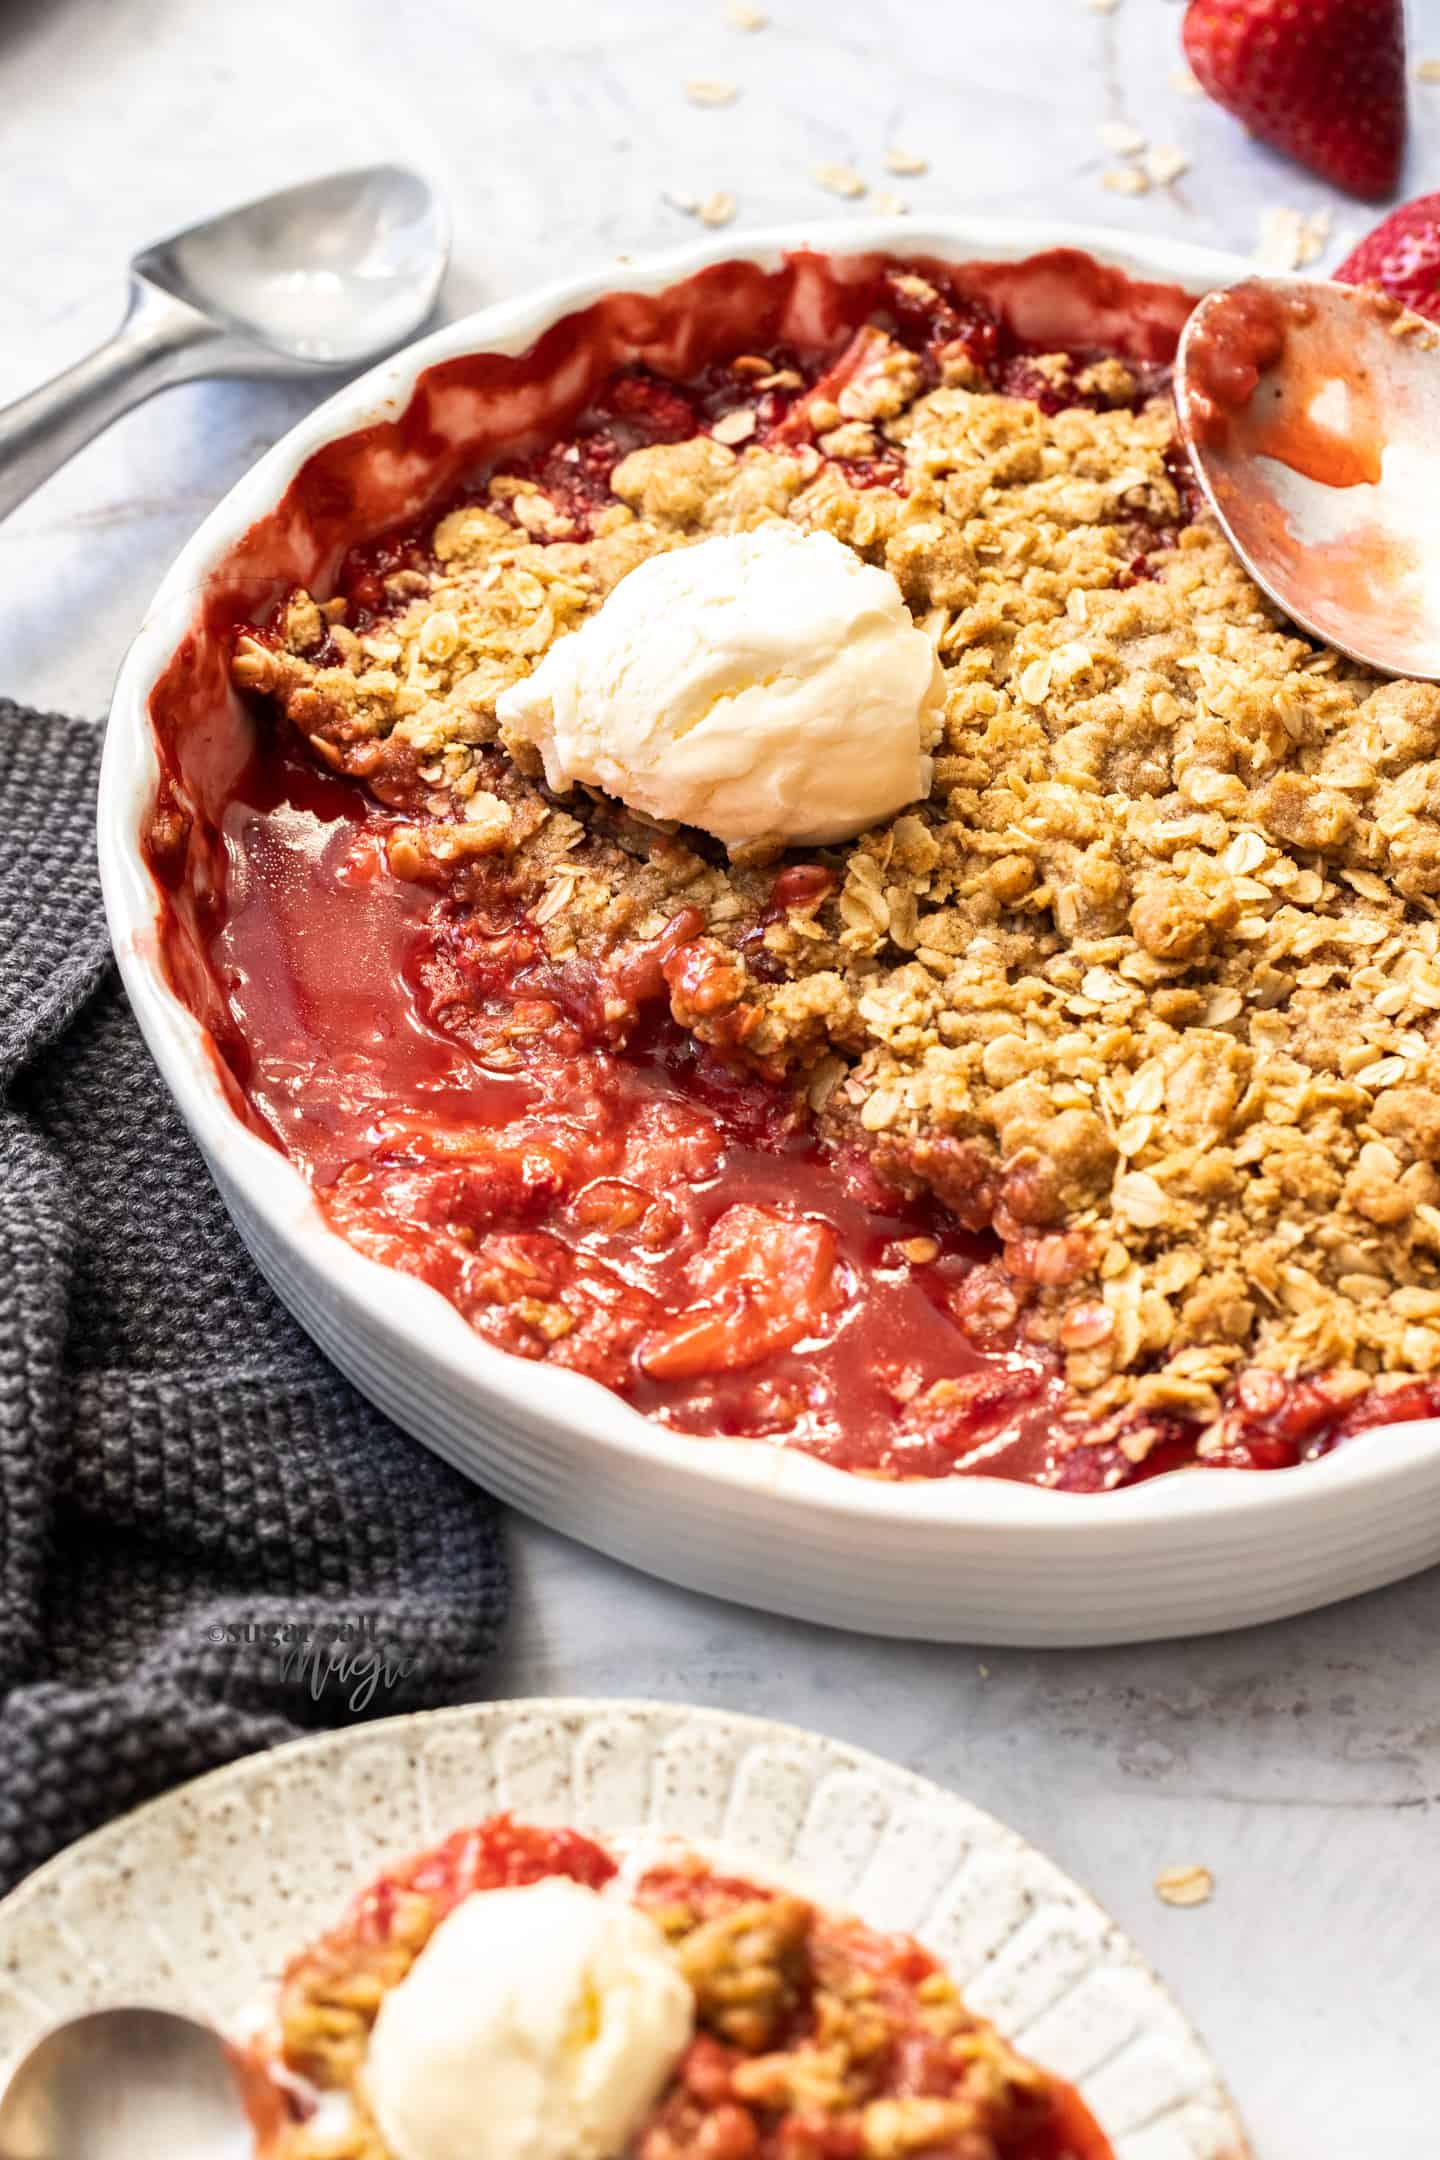 A white pie dish filled with baked strawberry crisp with a dollop of ice cream on top.